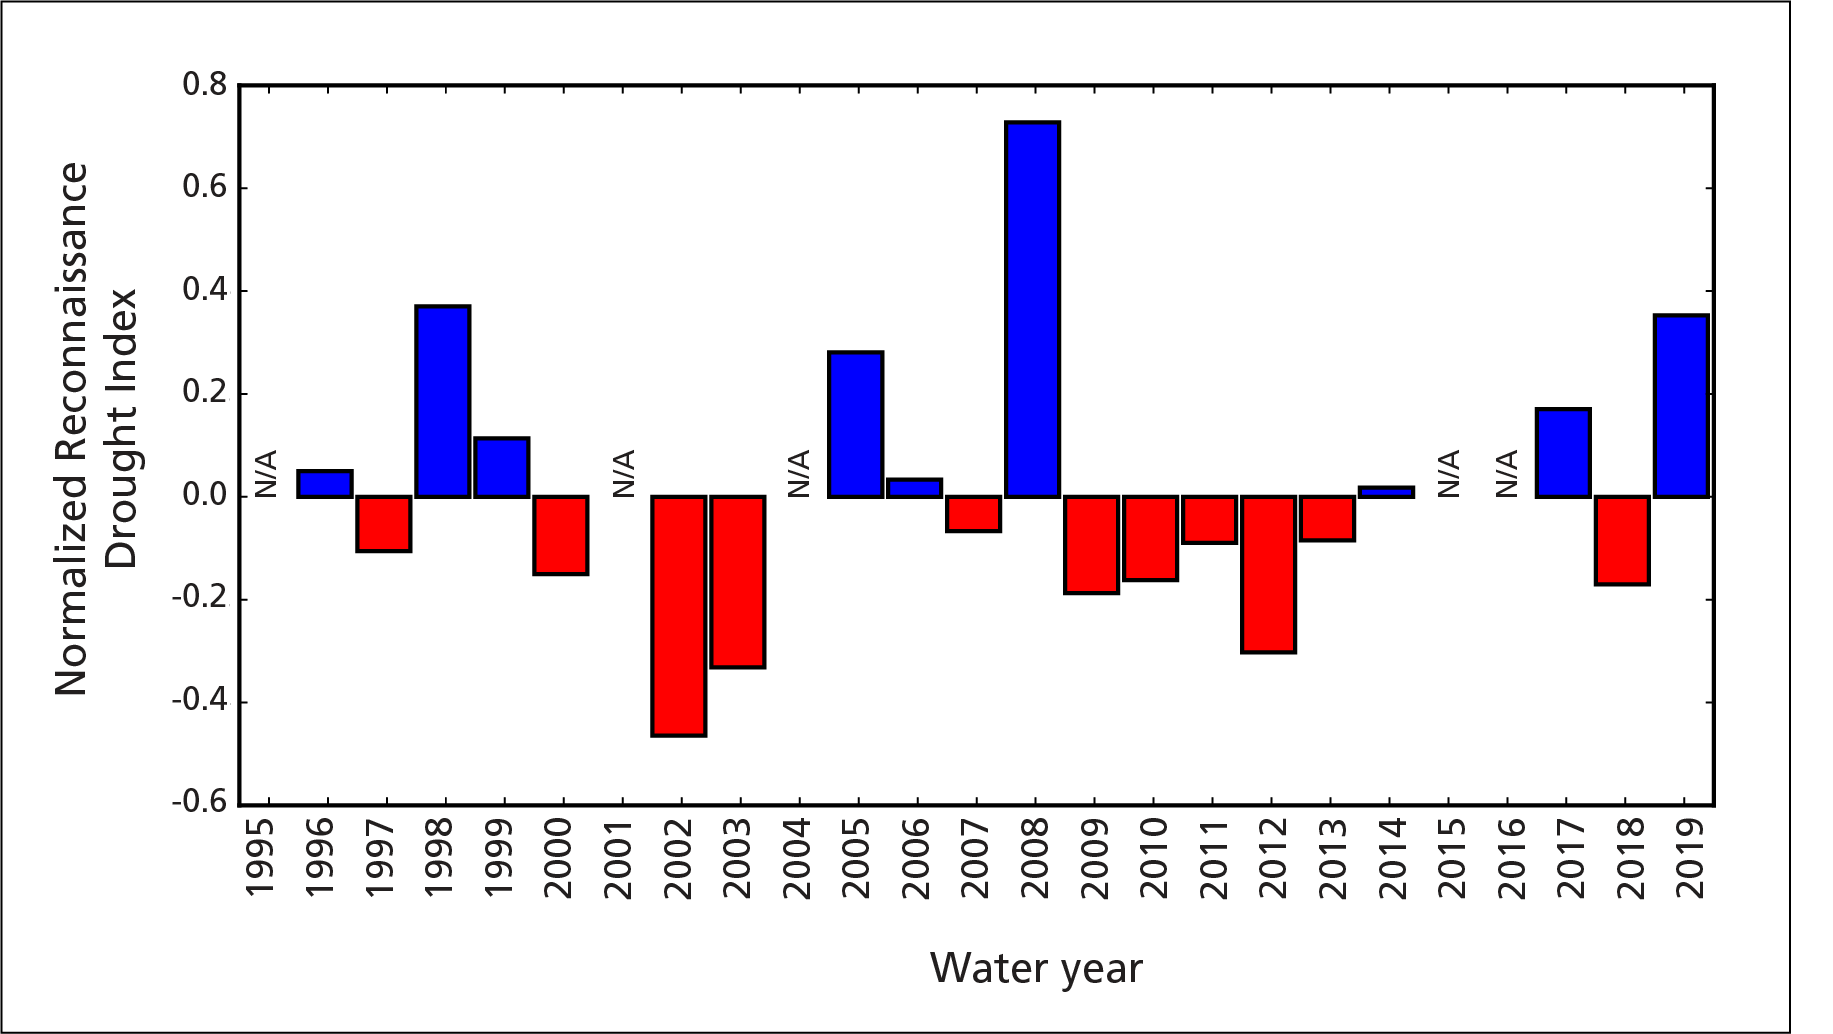 Departures from normal drought levels, Saguaro NP, WY1995-2019, showing WY2019 as wetter than normal.